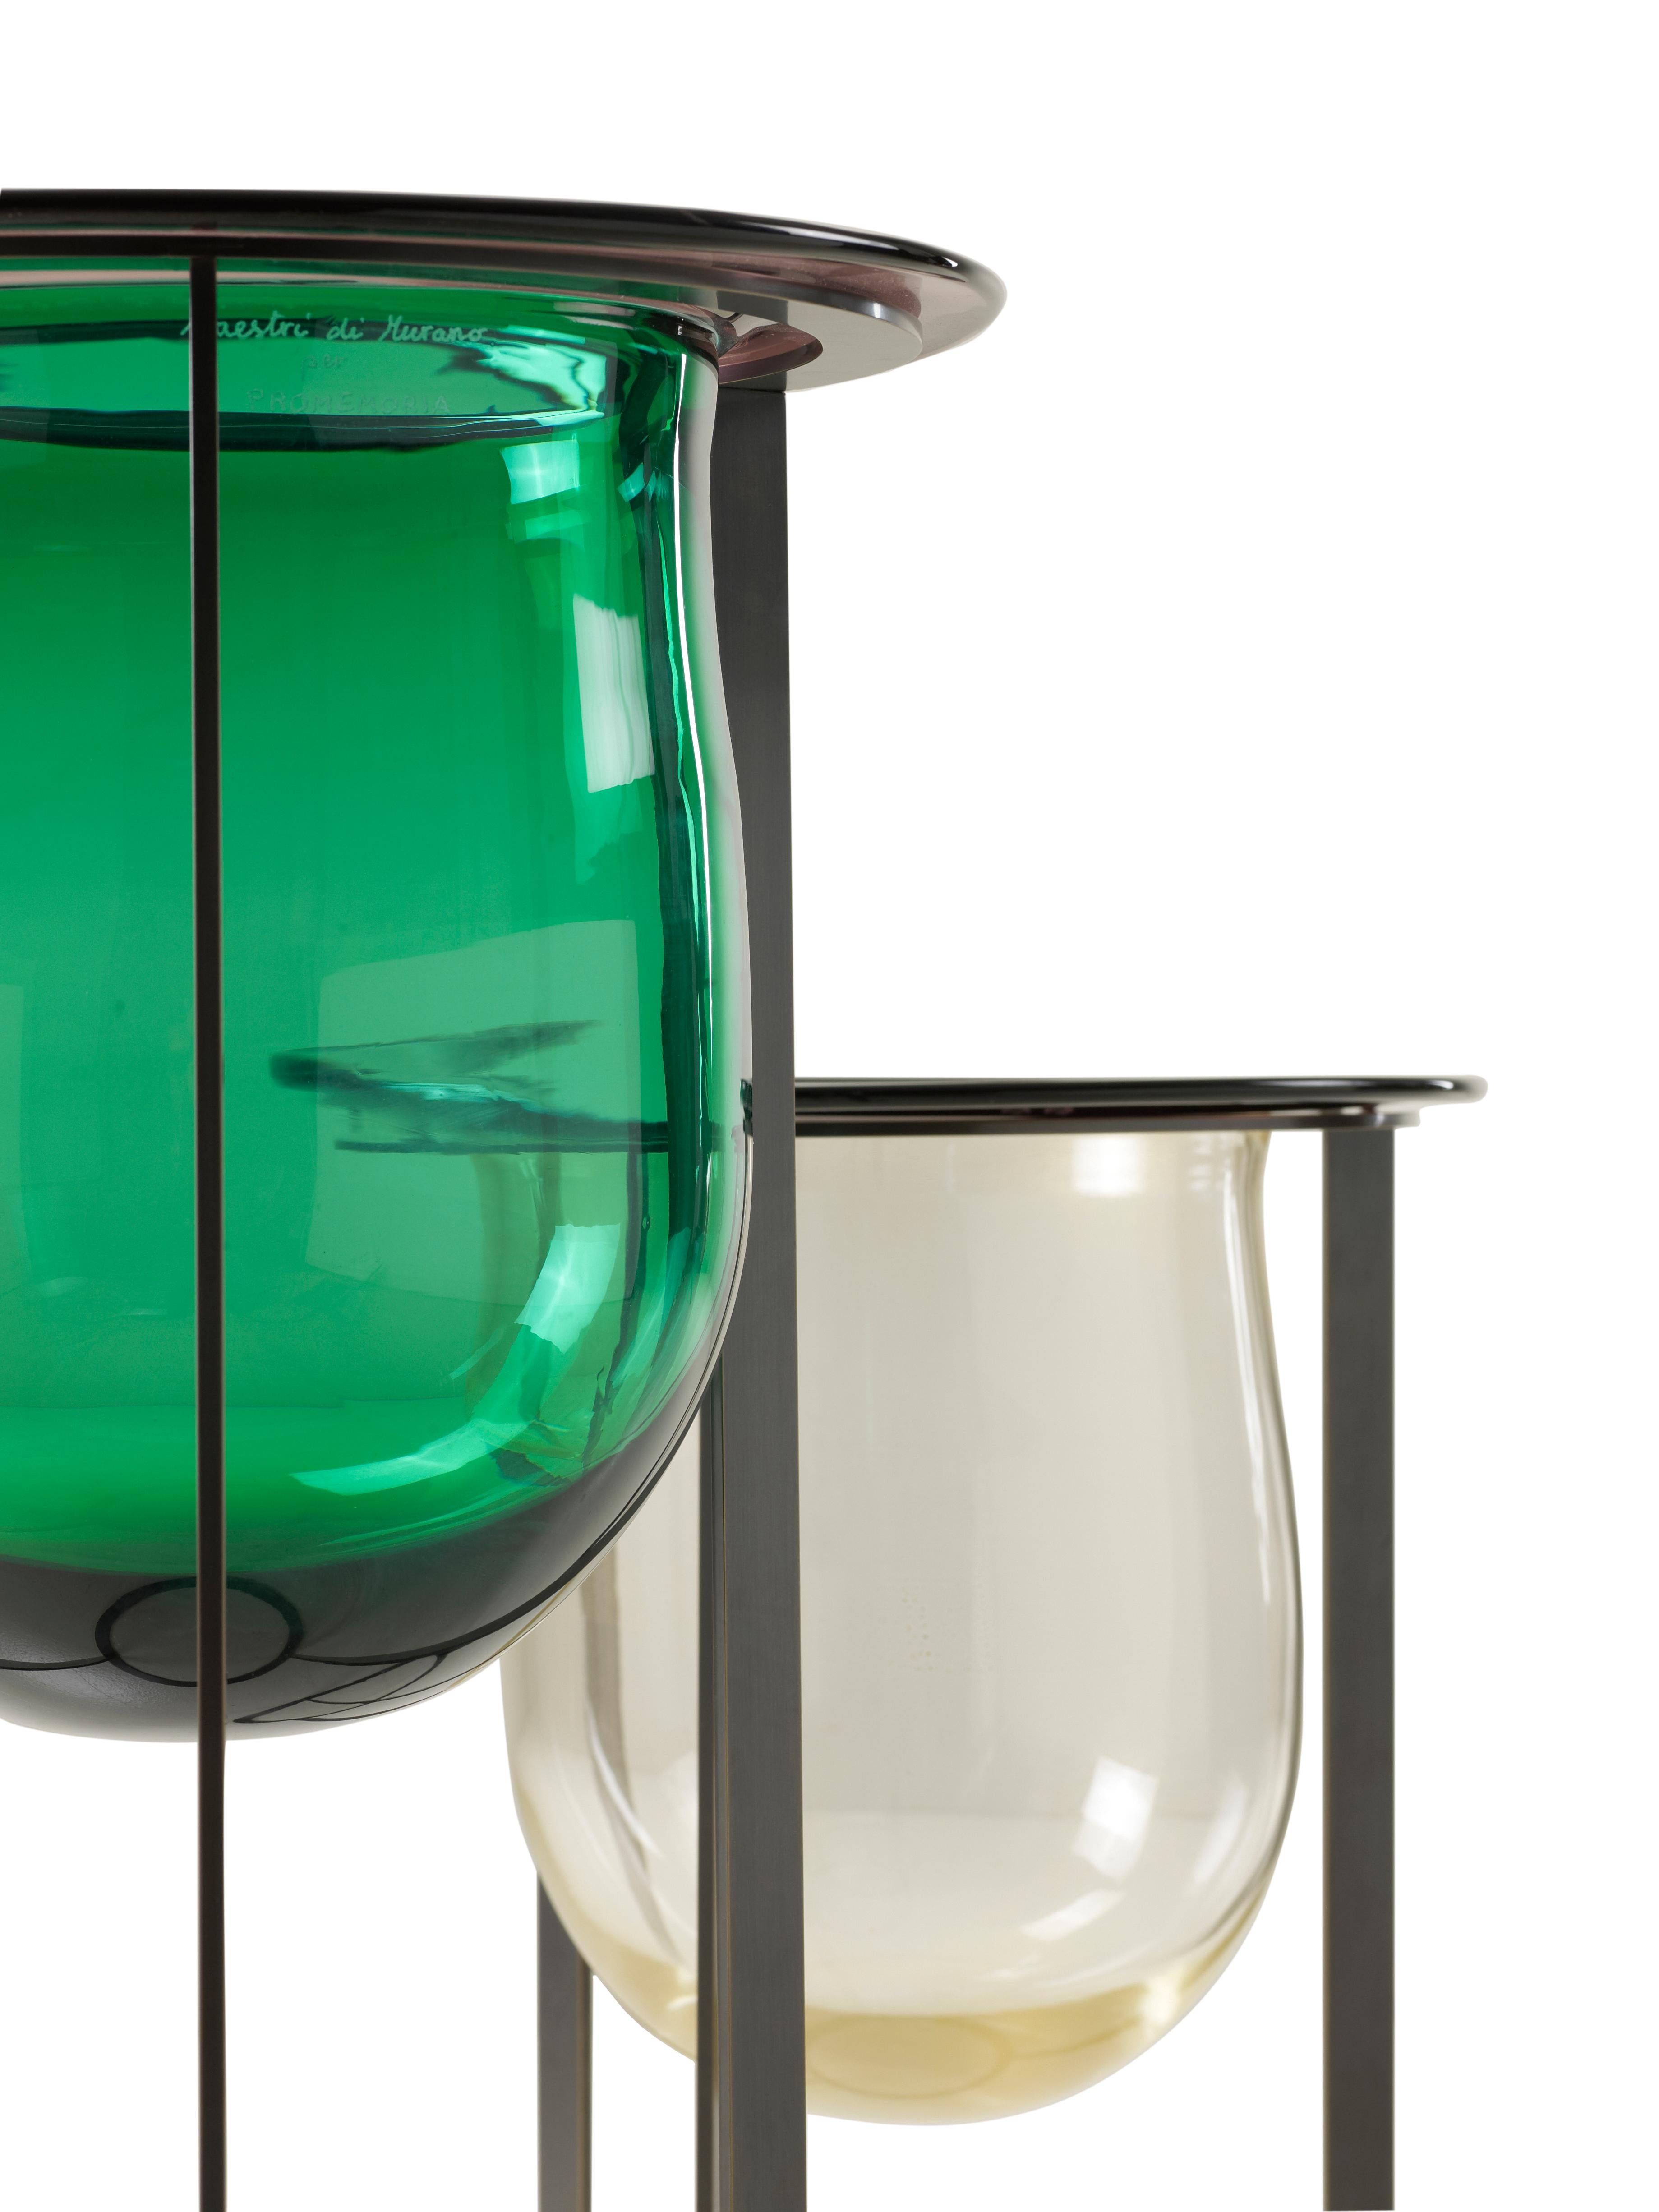 Vaso Canaletto is a Murano glass vase with a bronze and Murano glass structure. It is available in fumè, amethyst and silver, gold and green.
  